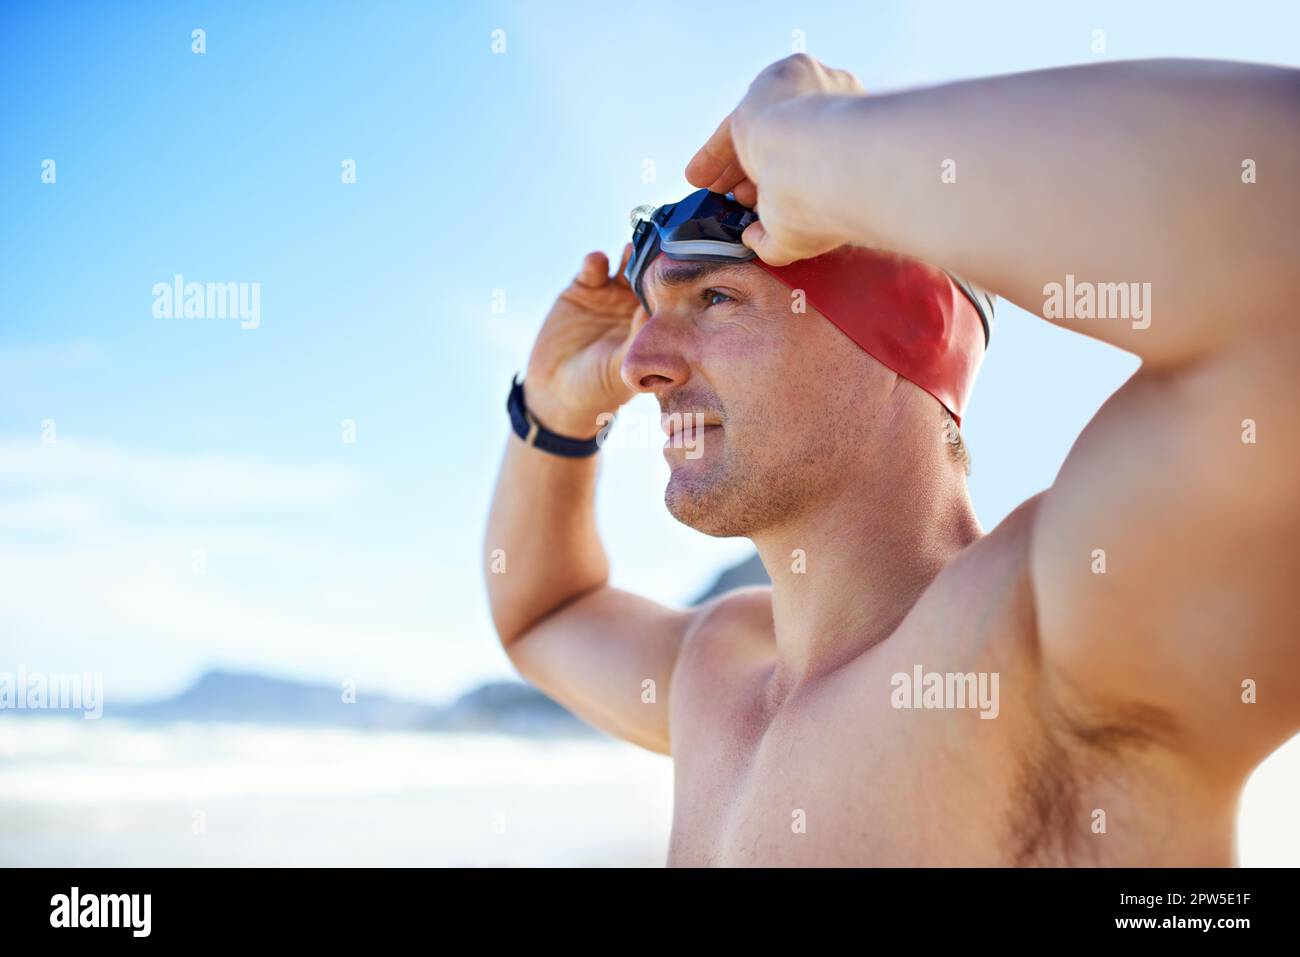 Preparing himself for his own record time. Cropped closeup shot of a man wearing swimming goggles looking out at the ocean Stock Photo